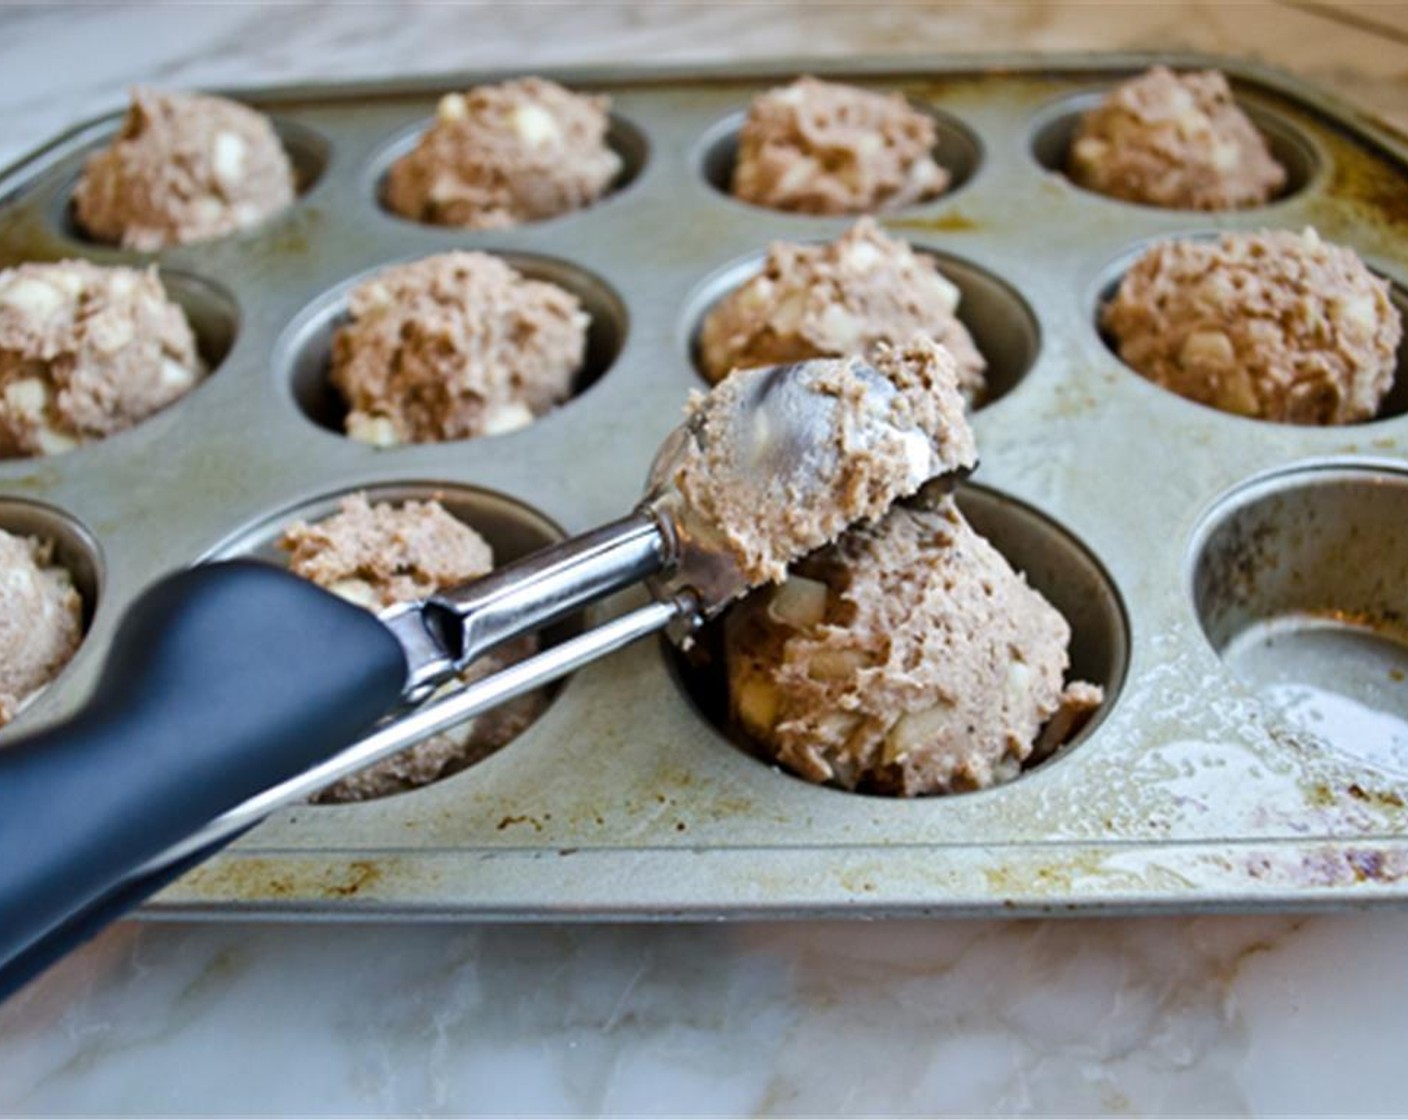 step 7 Use an ice-cream scooper or large spoon to divide the batter evenly among the prepared muffin cups. The cups should be full. Sprinkle the Dark Brown Sugar (2 Tbsp) evenly over top.